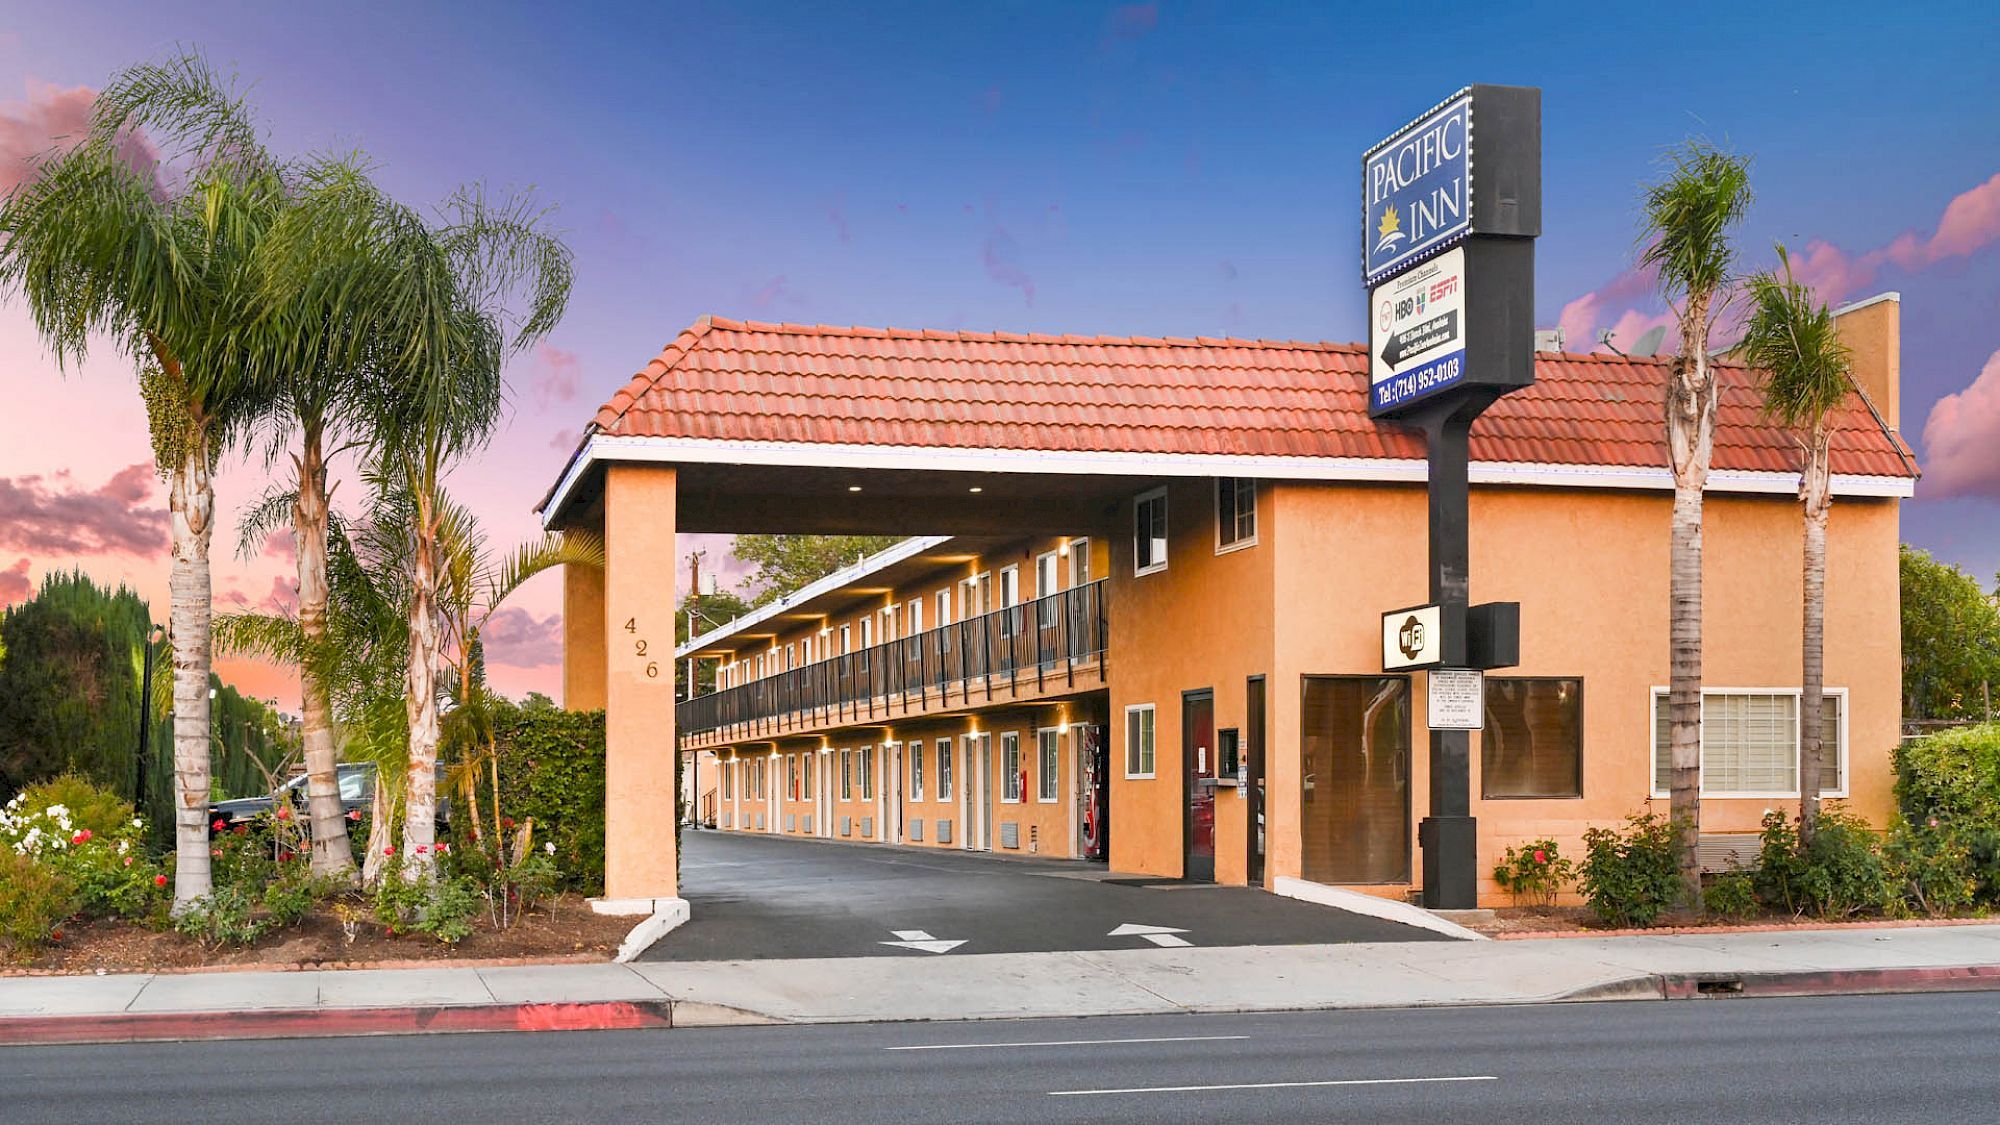 This image shows a two-story motel building with a 